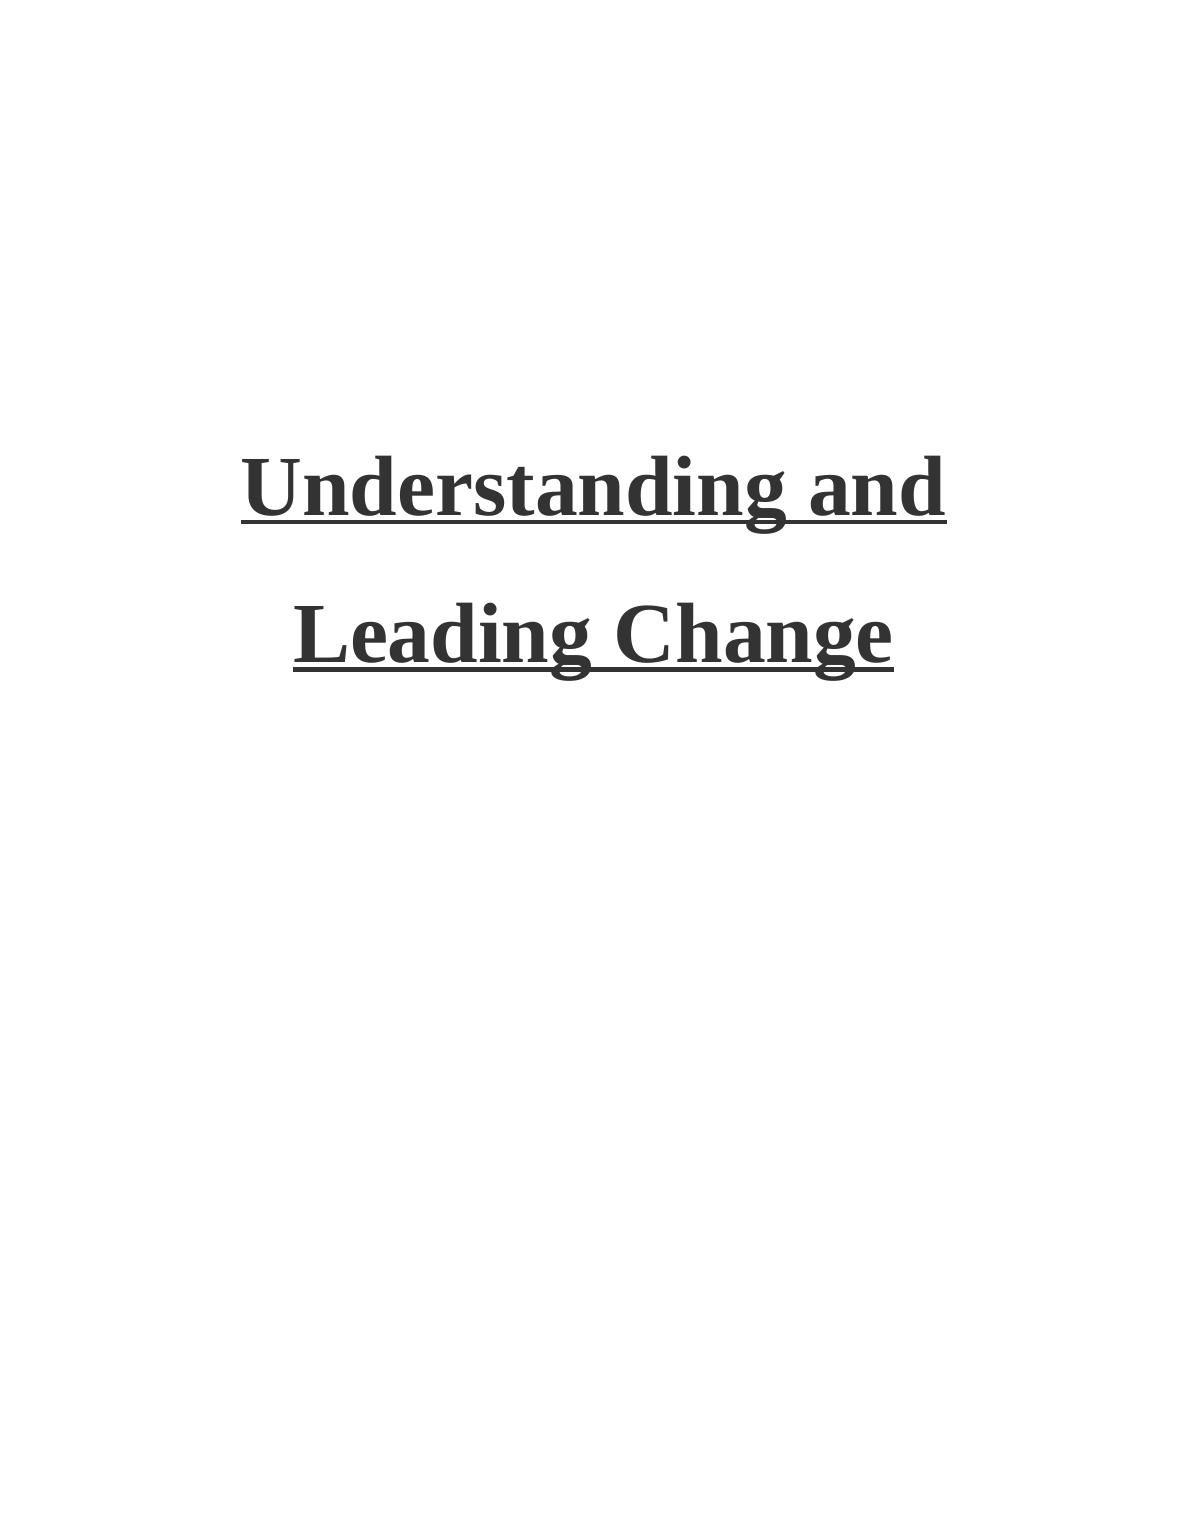 Understanding and Leading Change in Business : Report_1